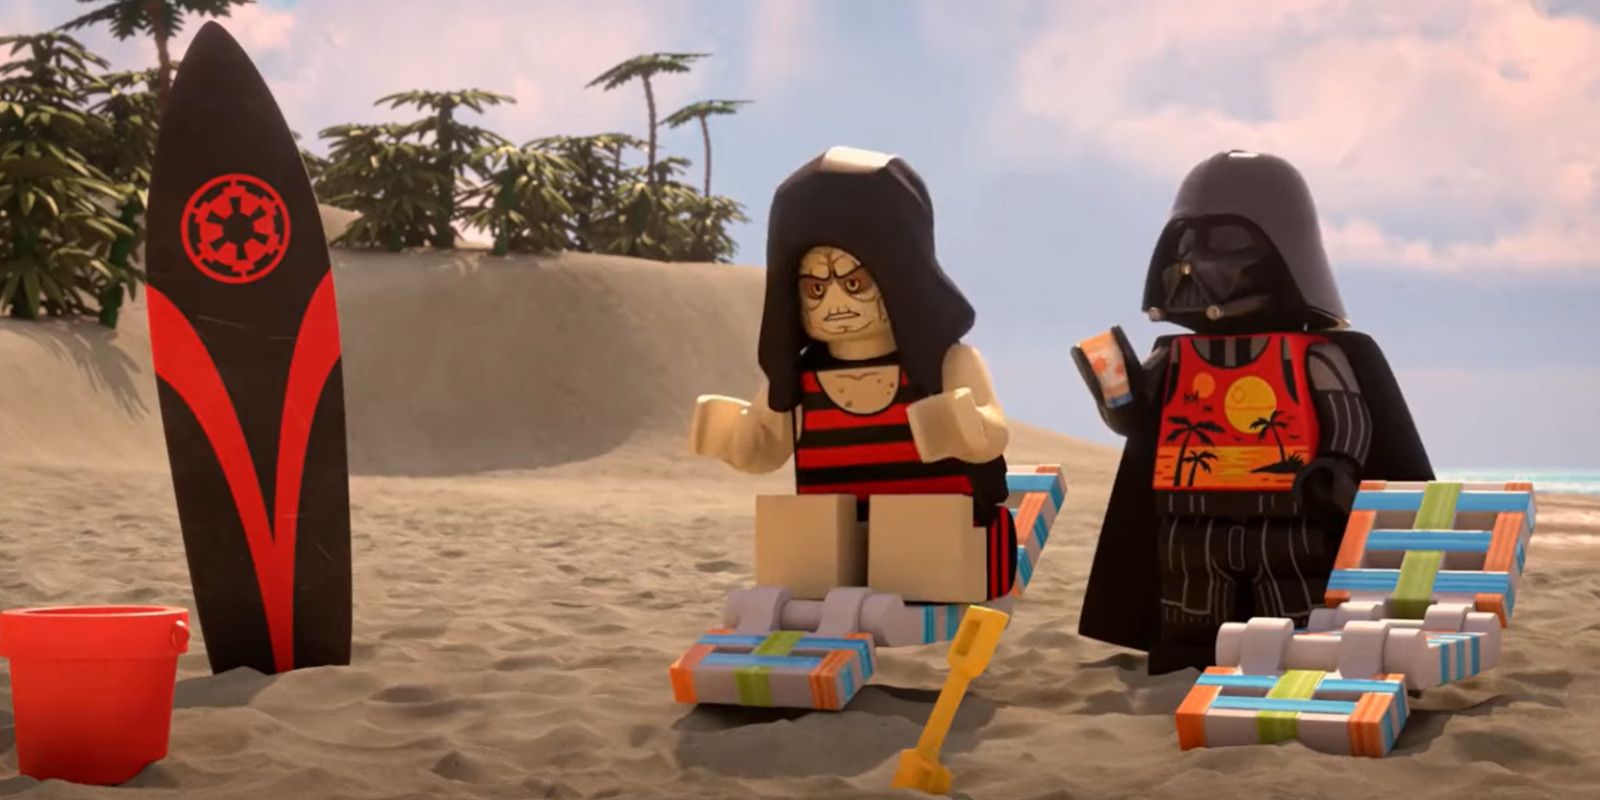 Palpatine and Darth Vader in LEGO Star Wars Summer Vacation